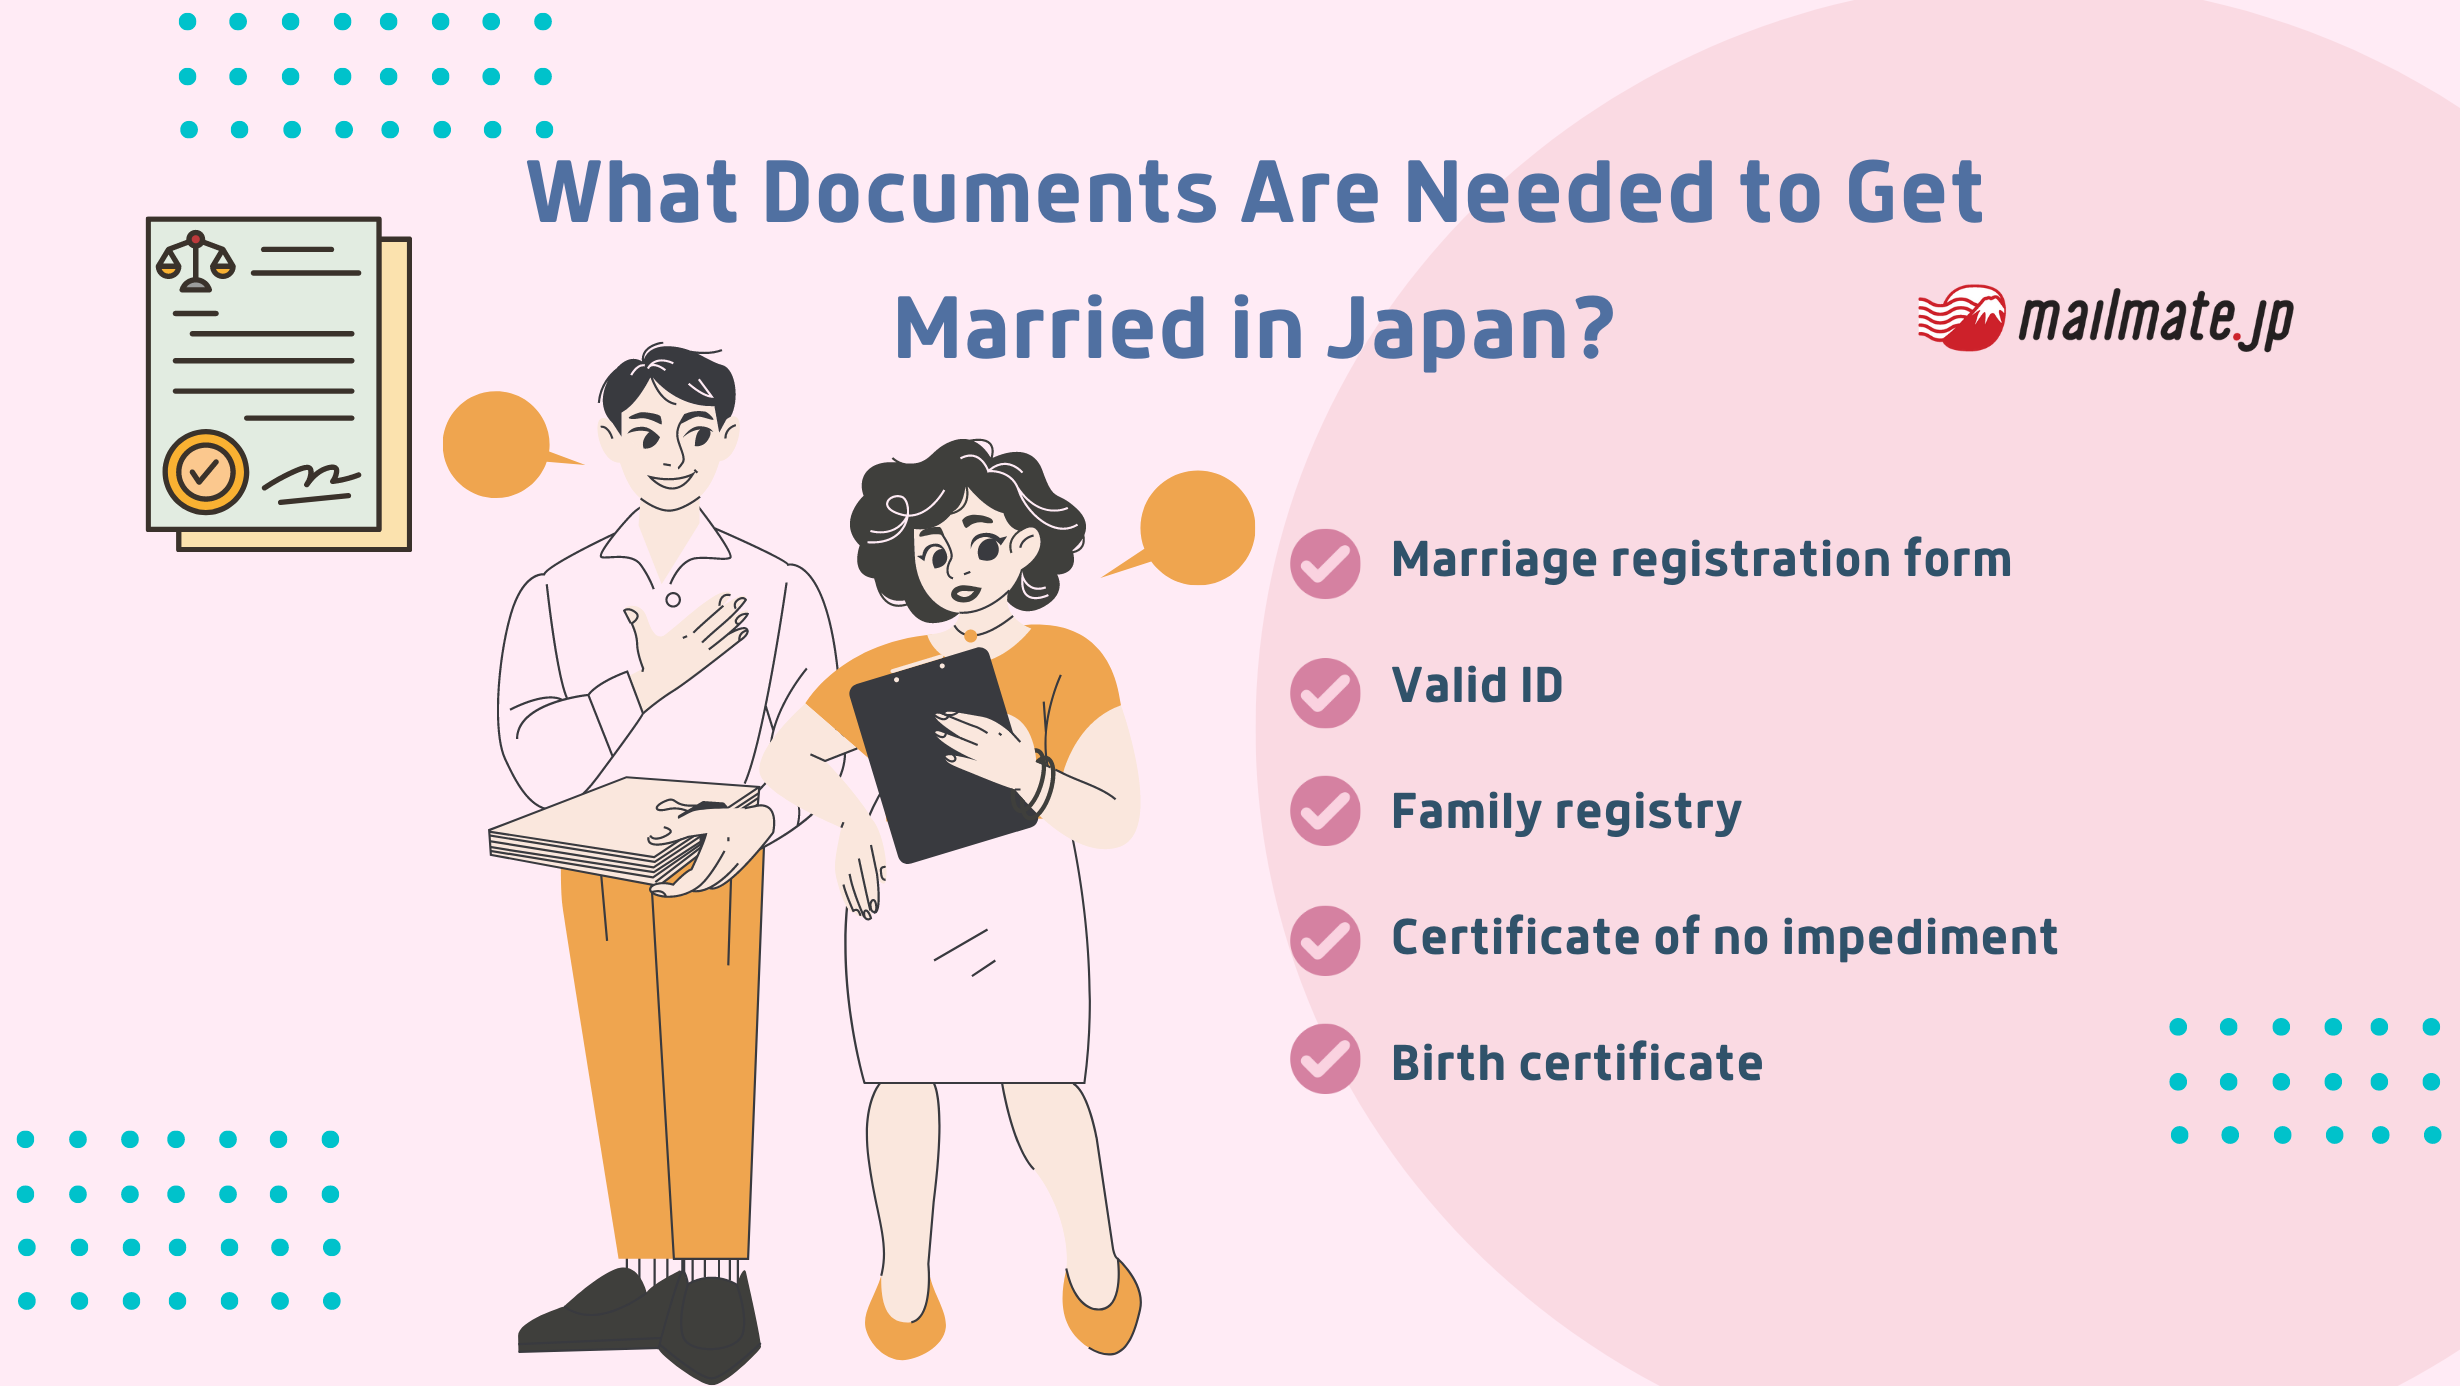 How to Get Married in Japan: Document Checklist + Step-by-Step Guide